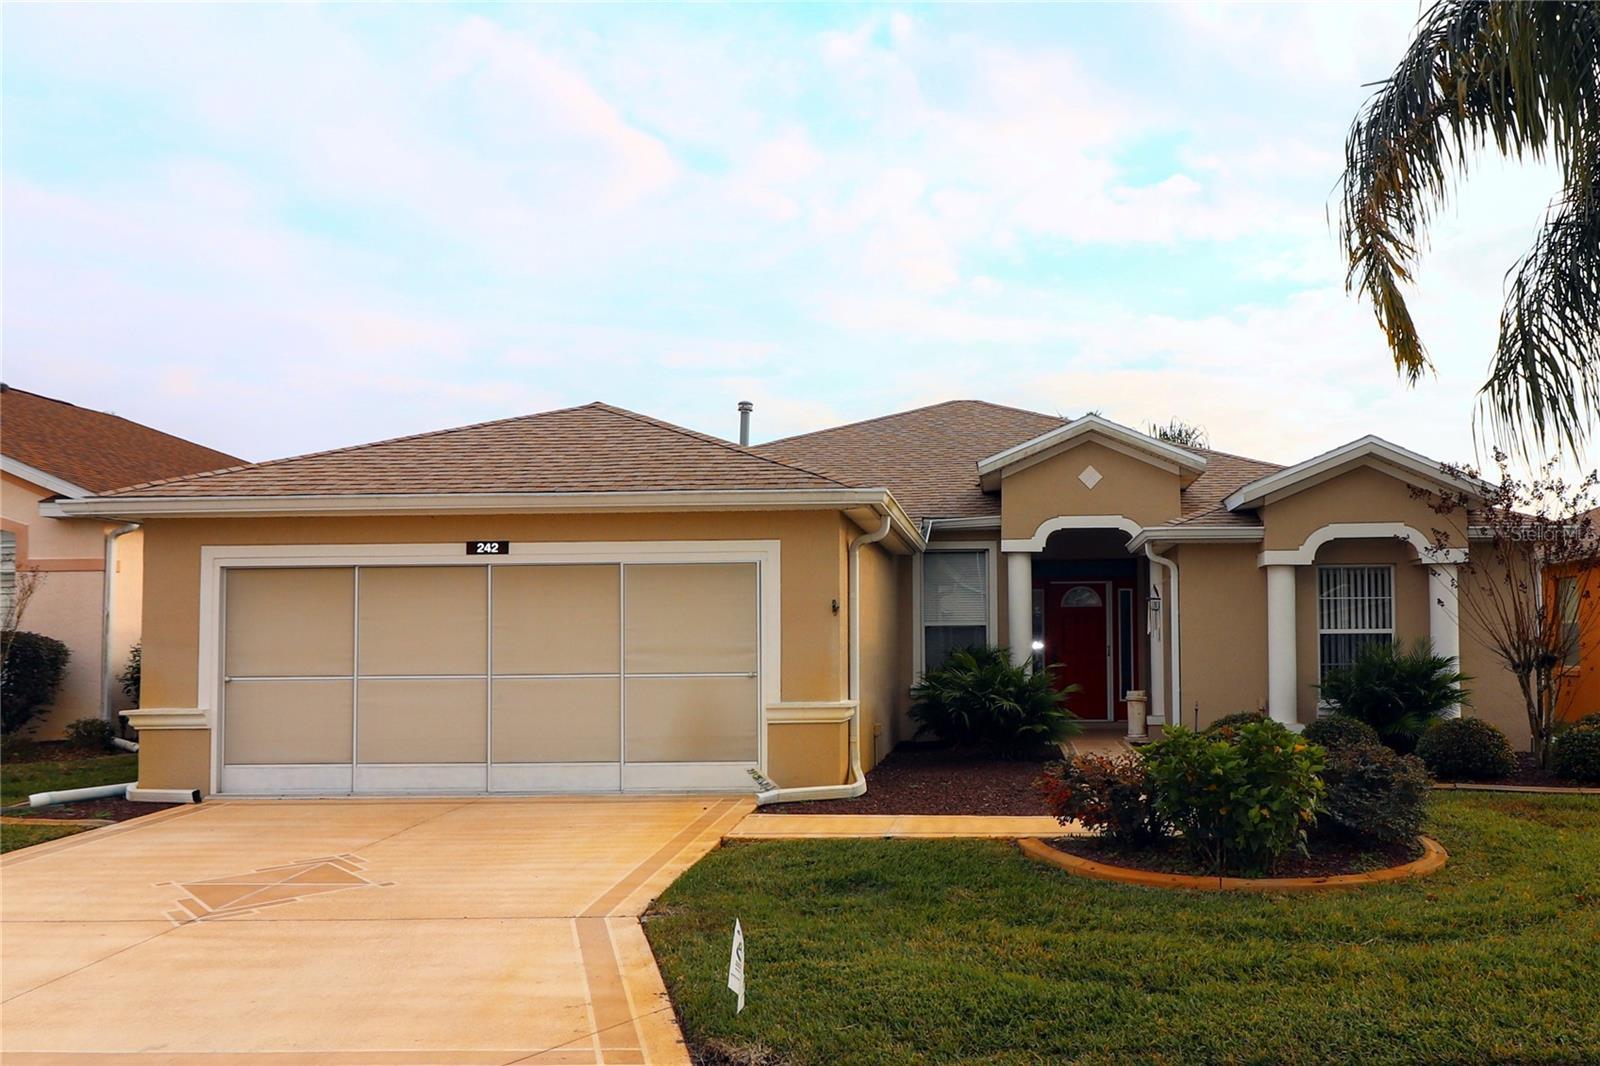 Photo one of 242 Bentwood Dr Leesburg FL 34748 | MLS G5078780